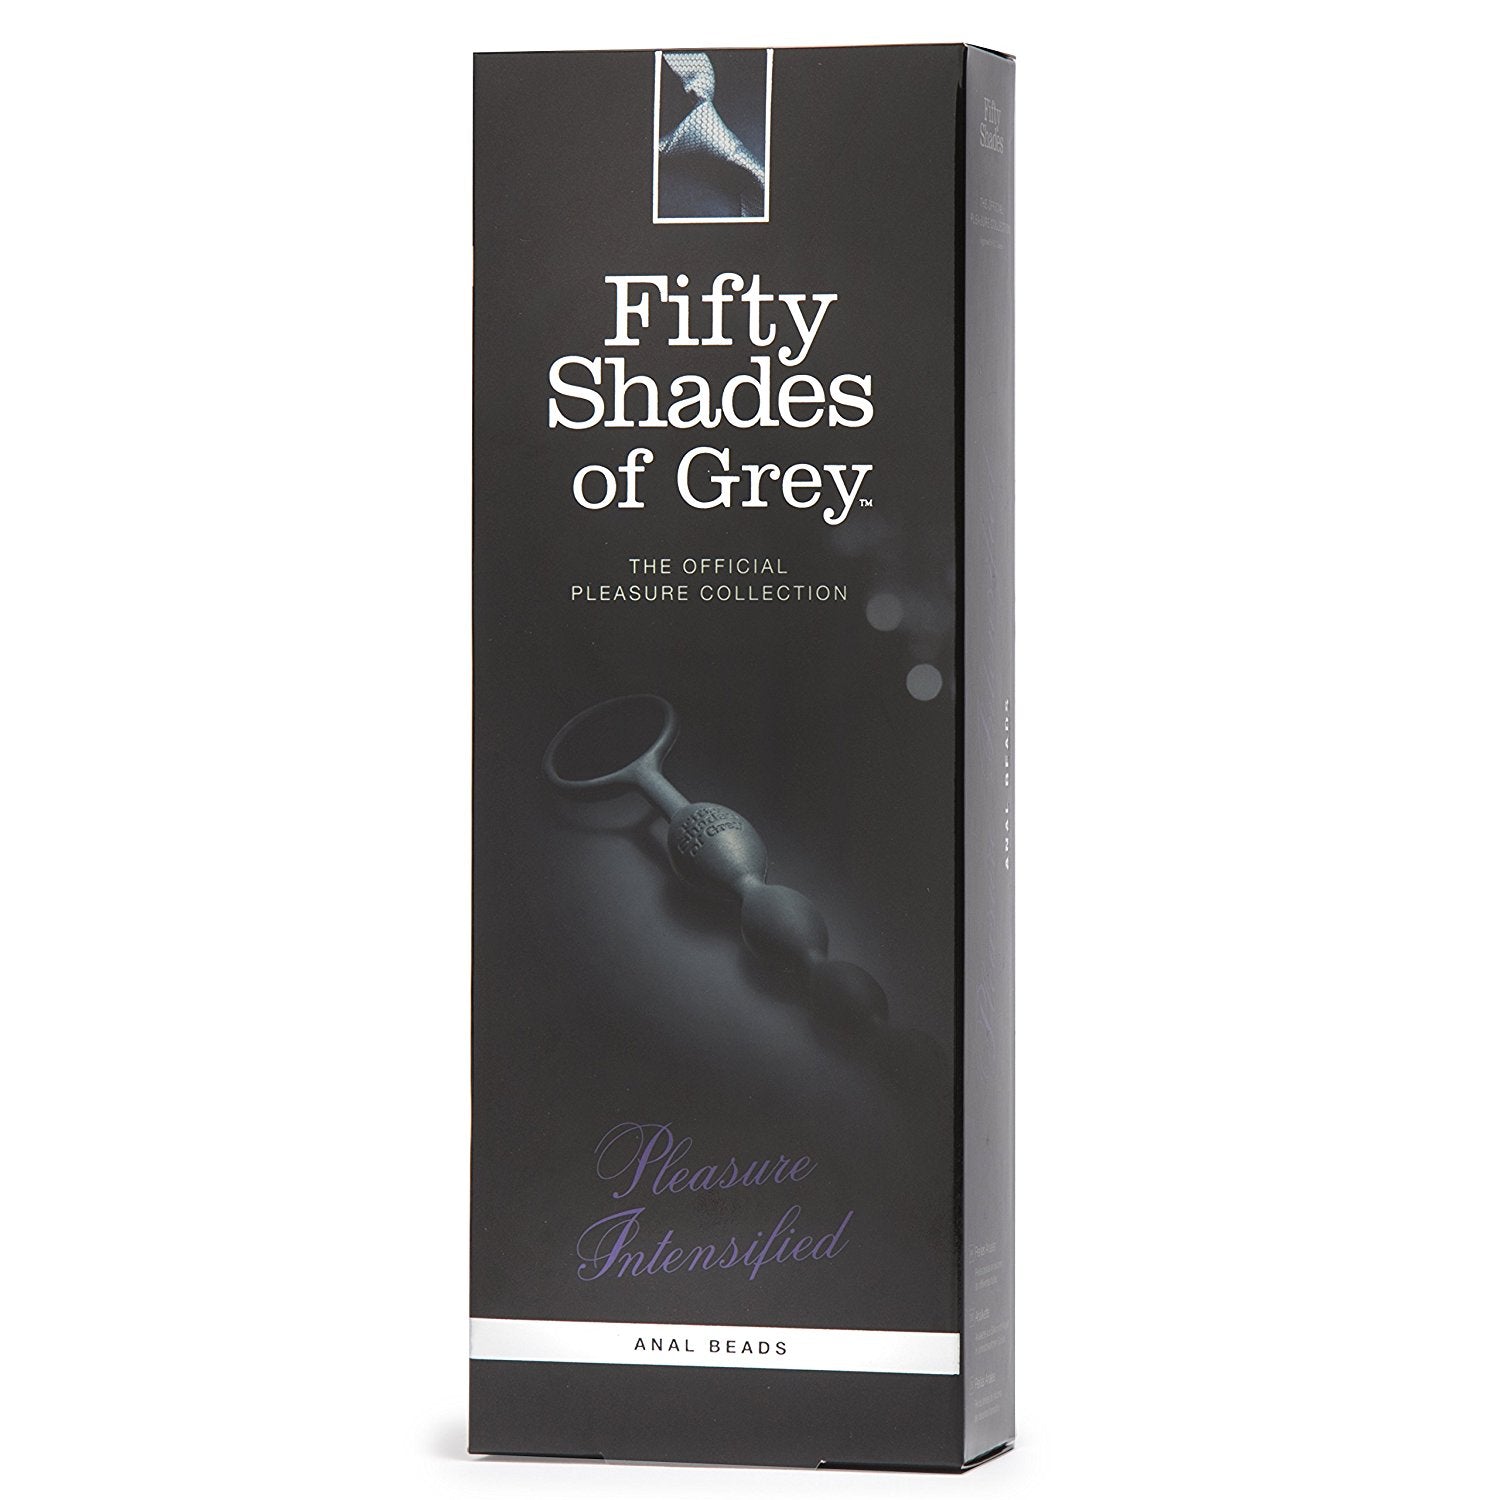 Fifty Shades of Grey - Pleasure Intensified Anal Beads Anal Beads (Non Vibration) Durio Asia